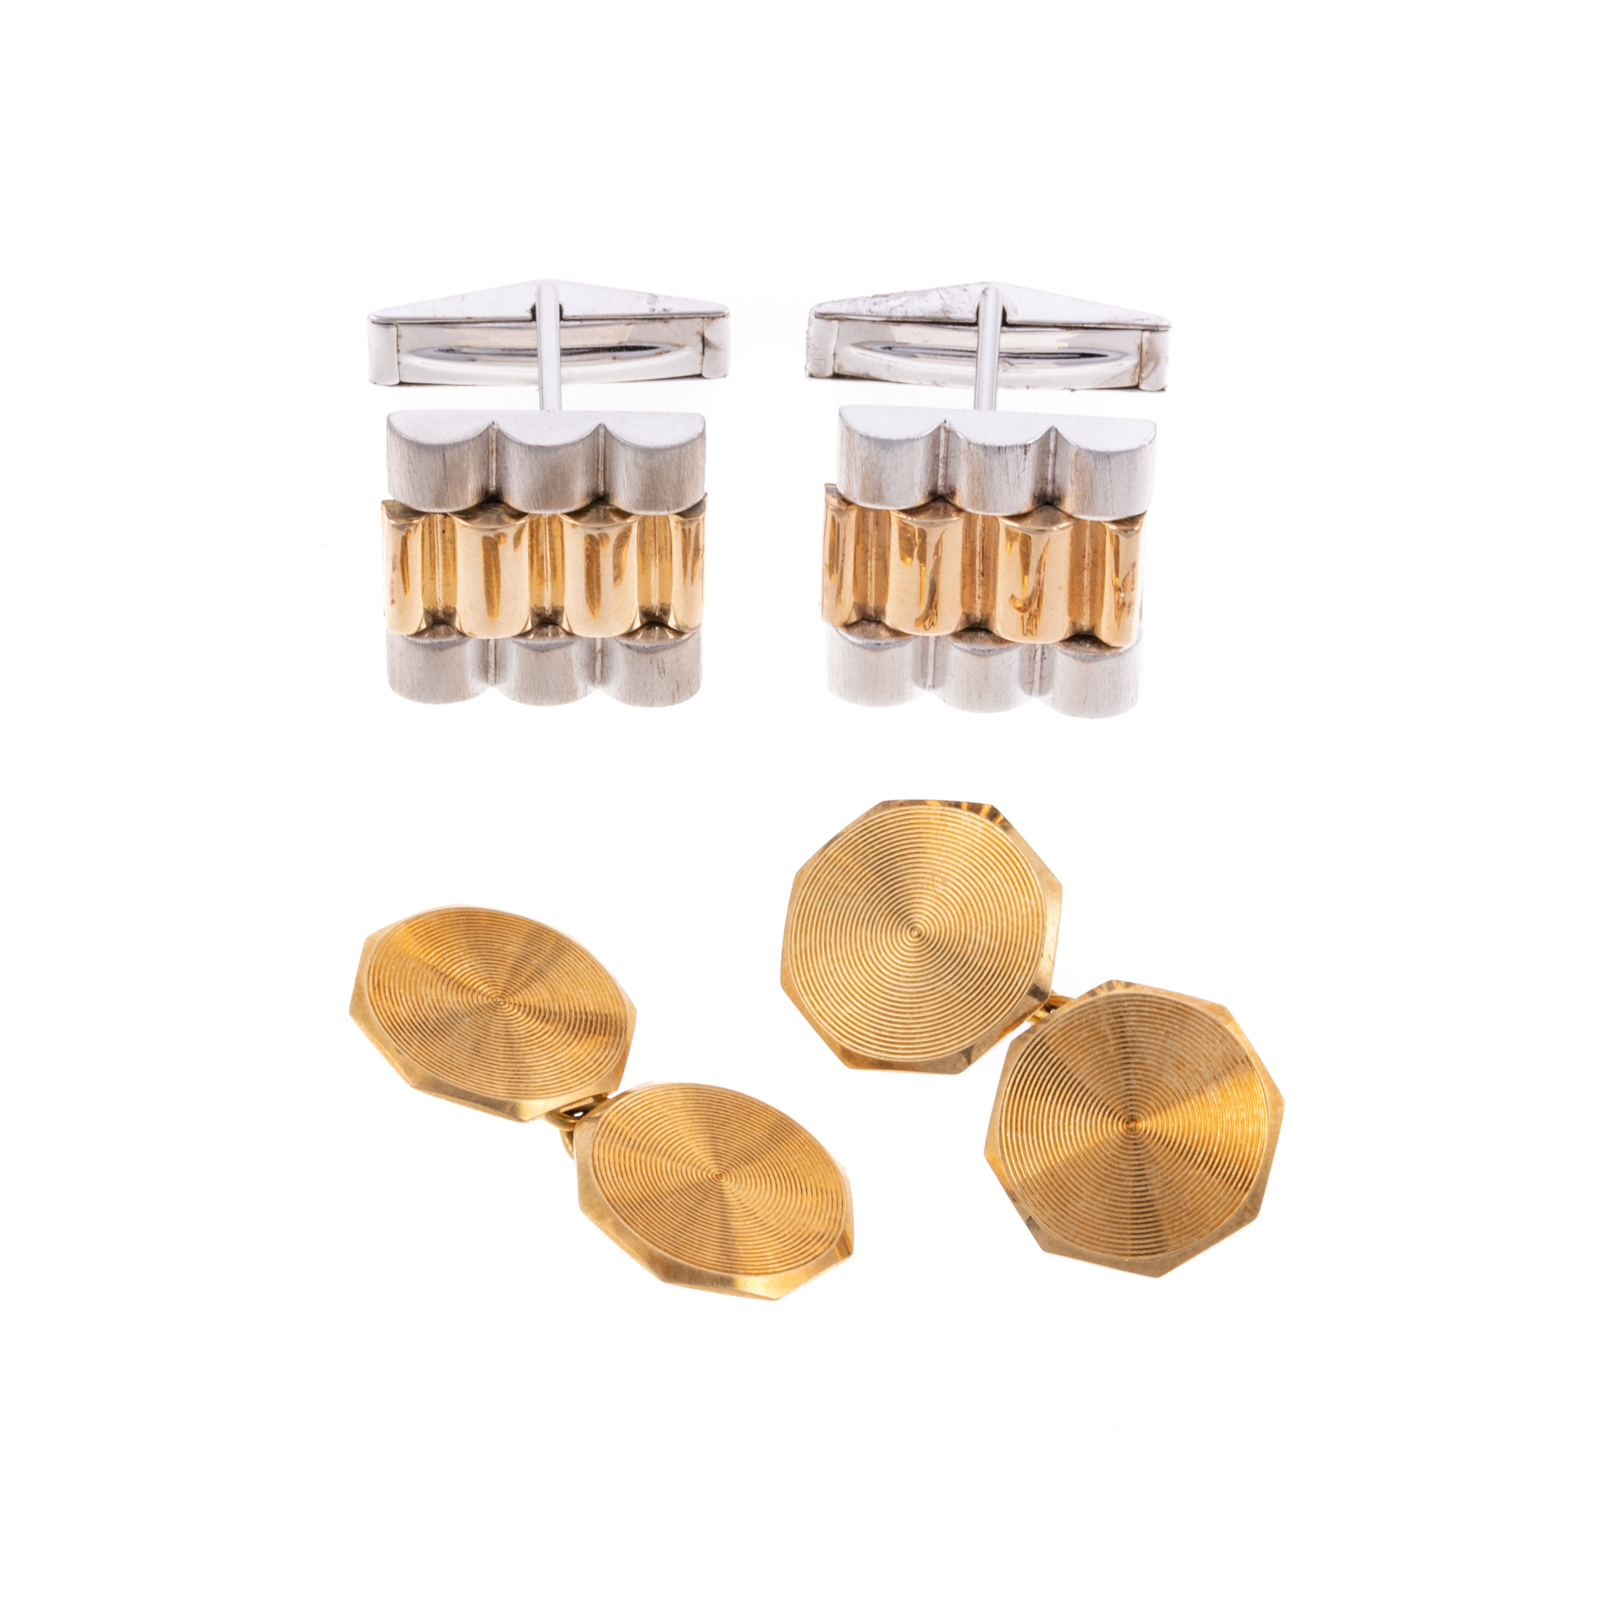 TWO PAIRS OF CUFFLINKS IN 18K,